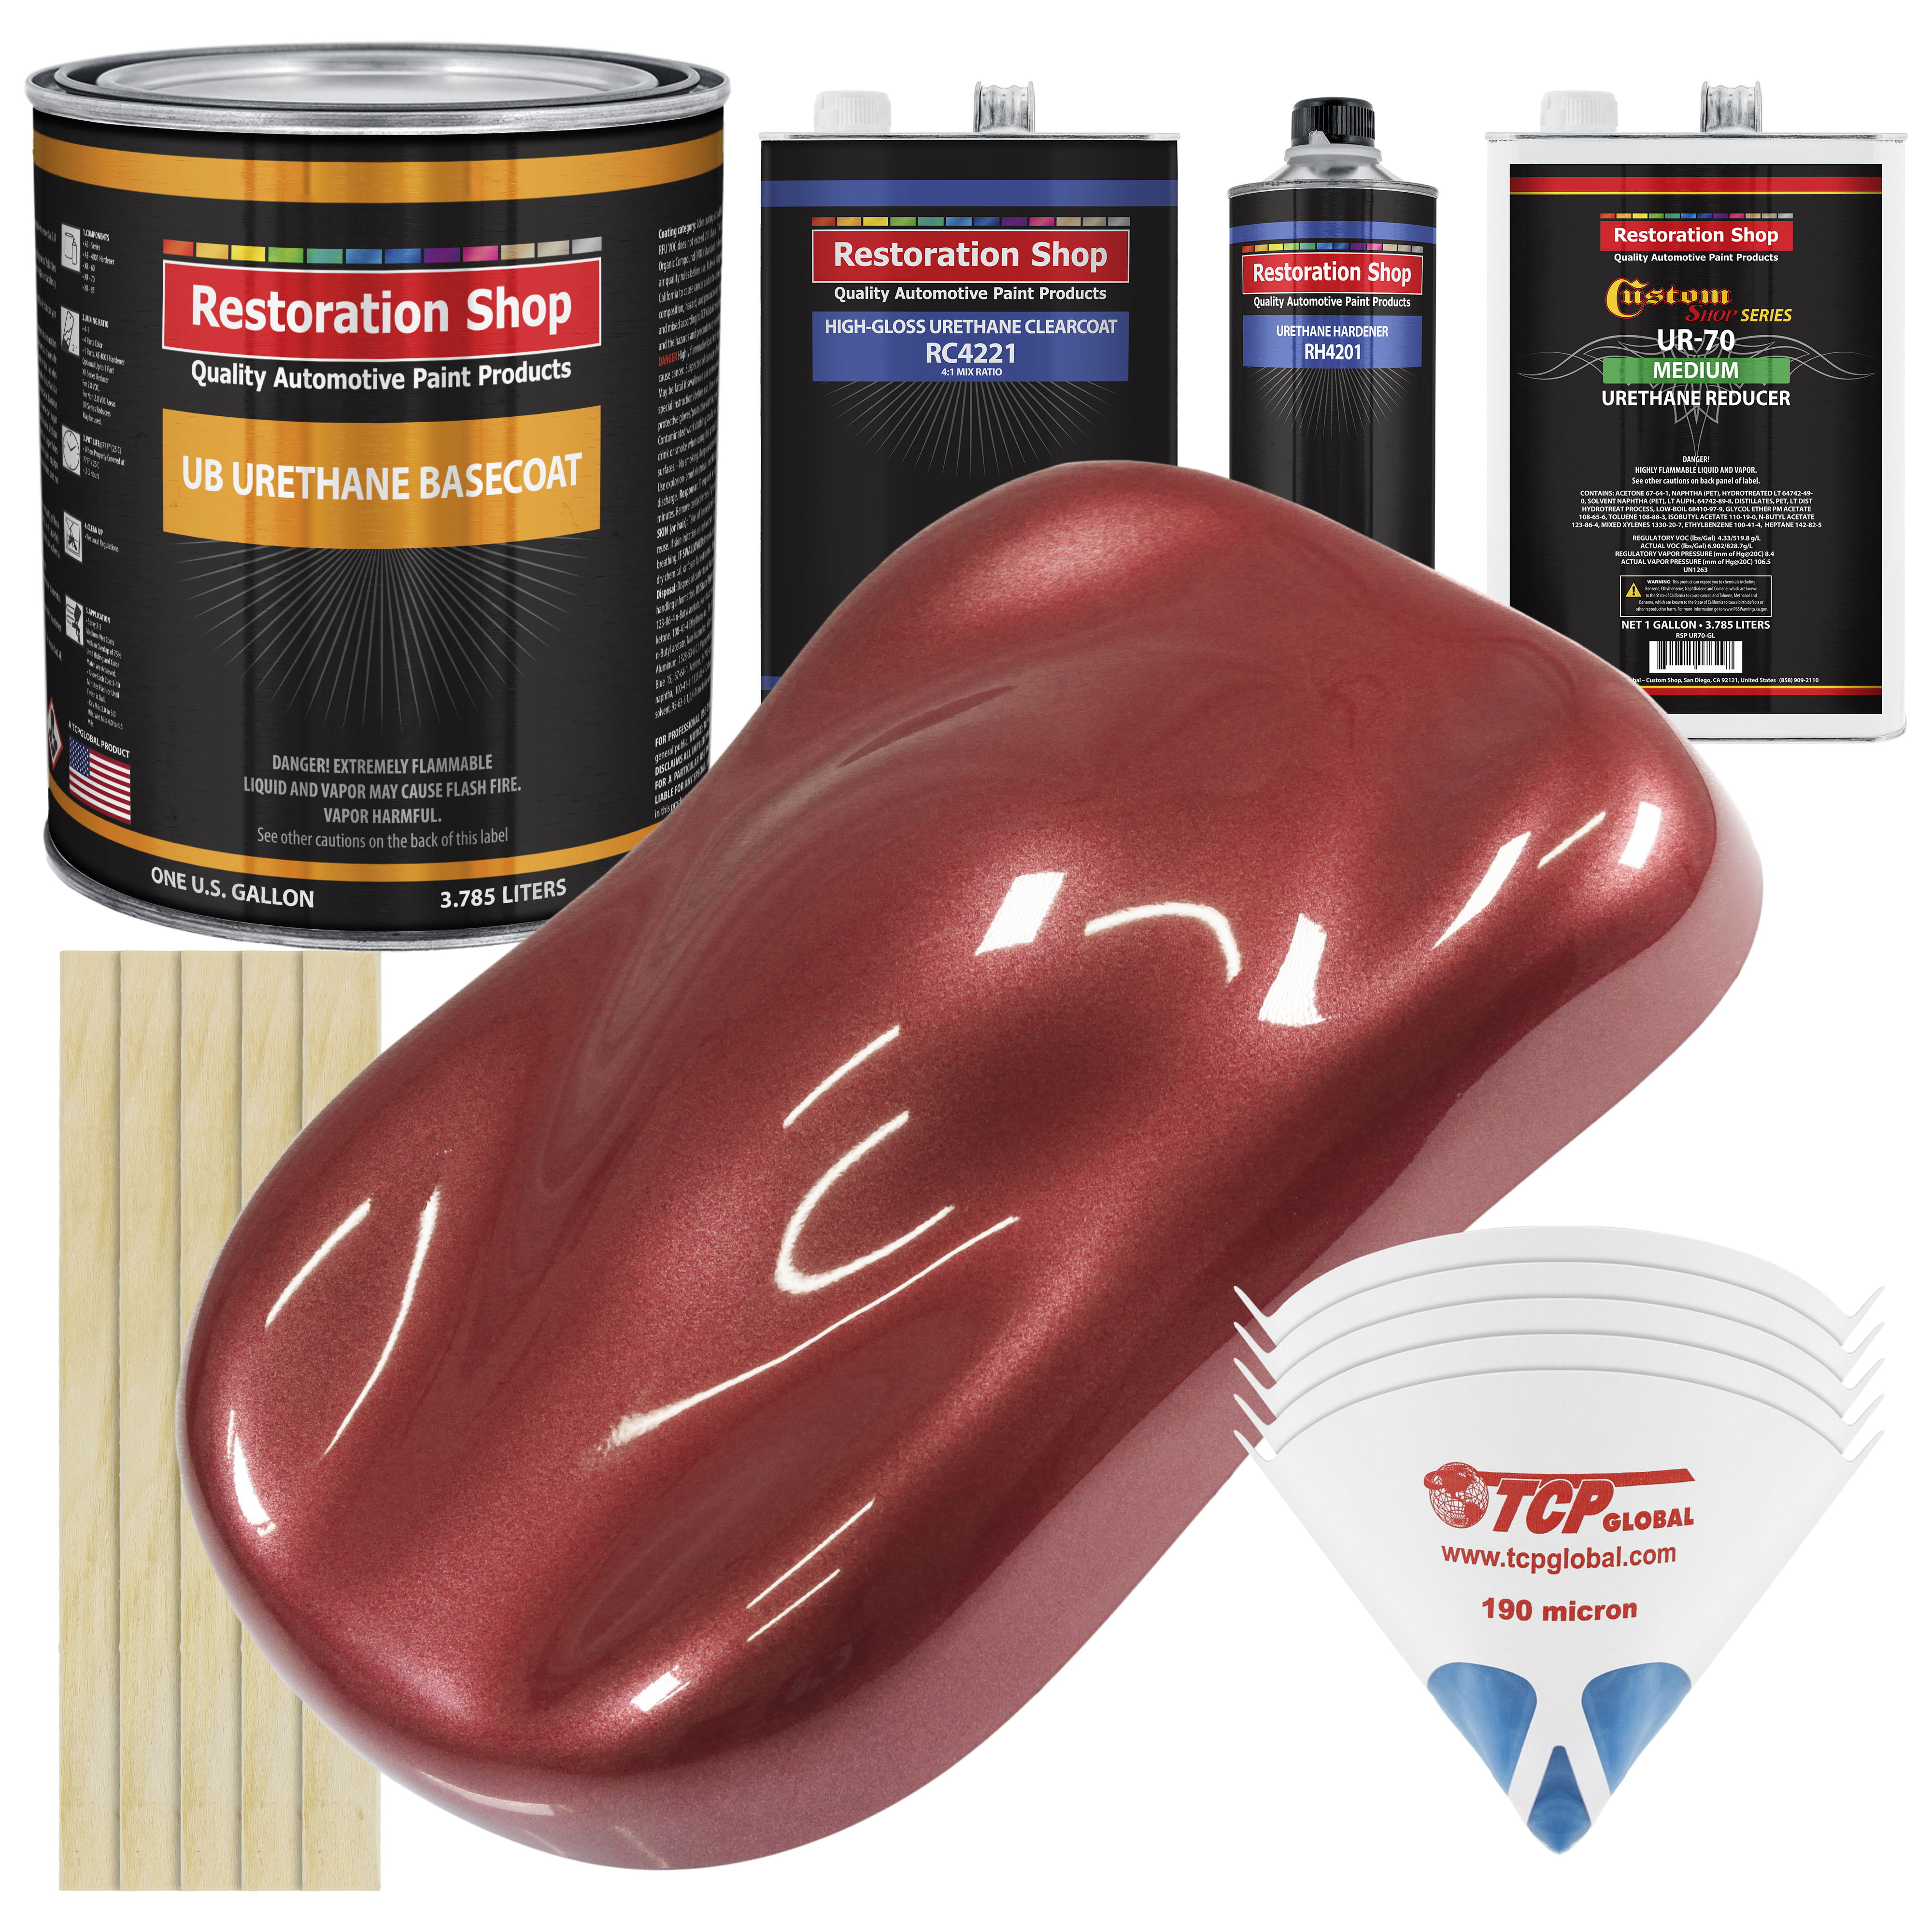 candy apple red metallic paint